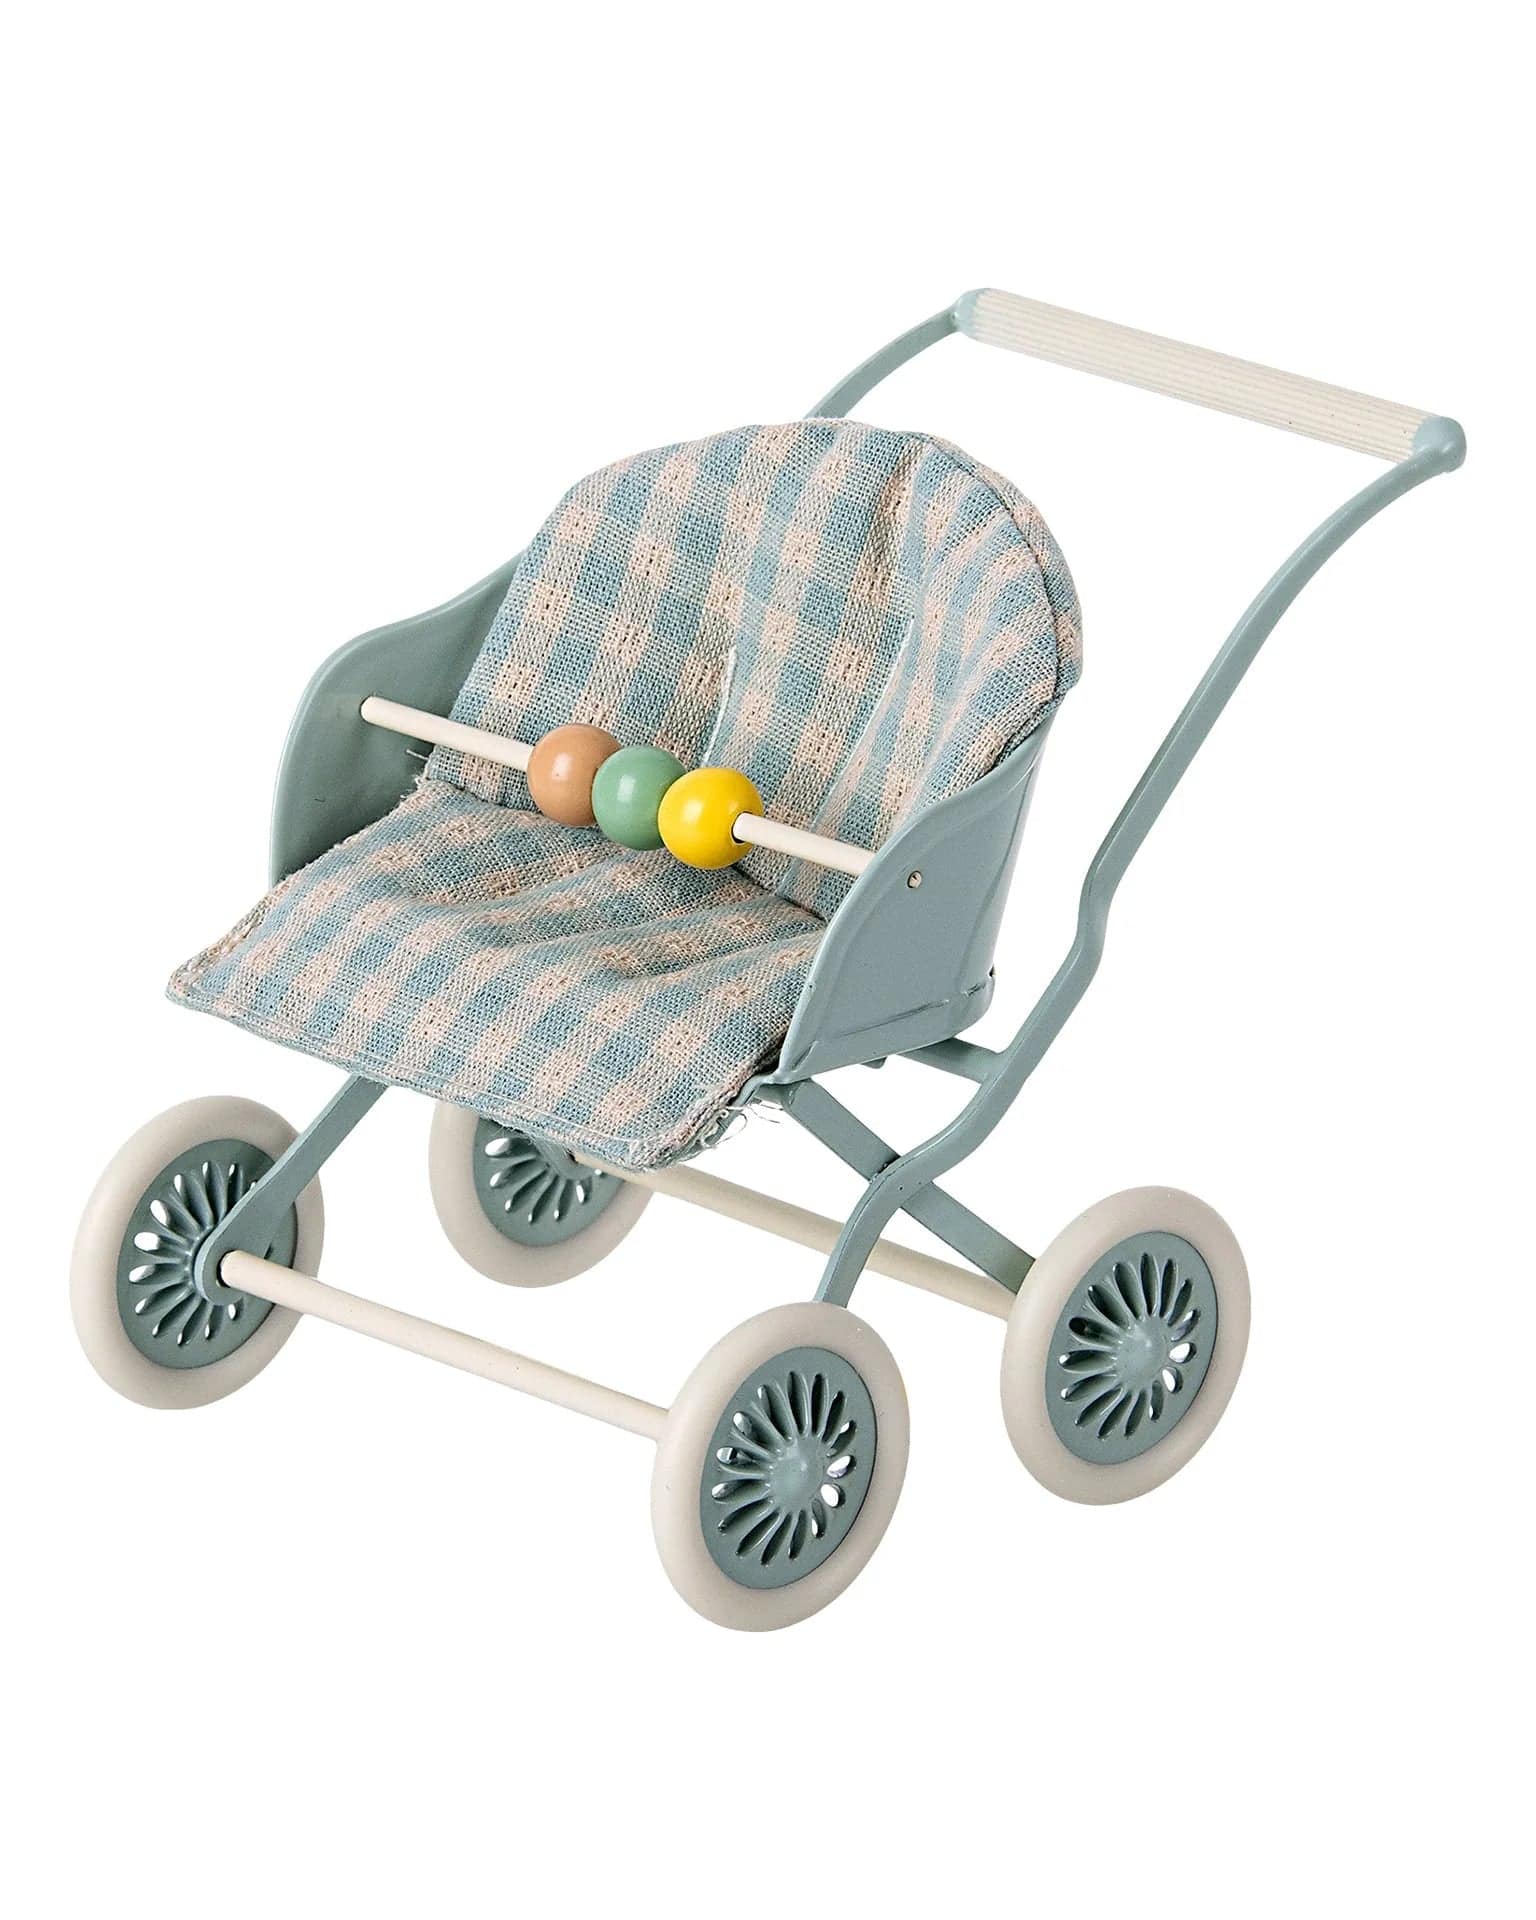 Stroller Mint - A Child's Delight